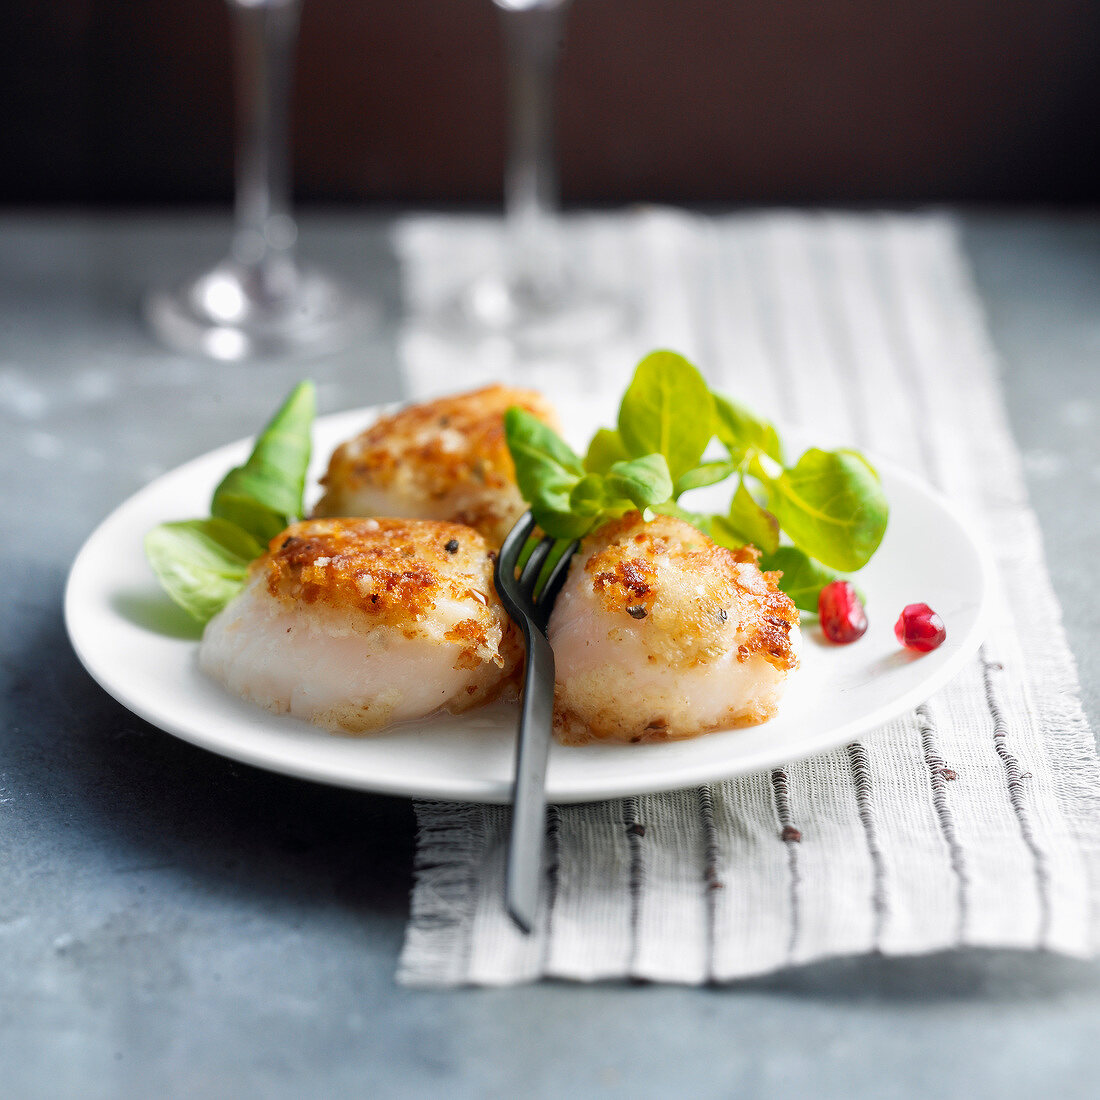 Scallops coated with mild spices